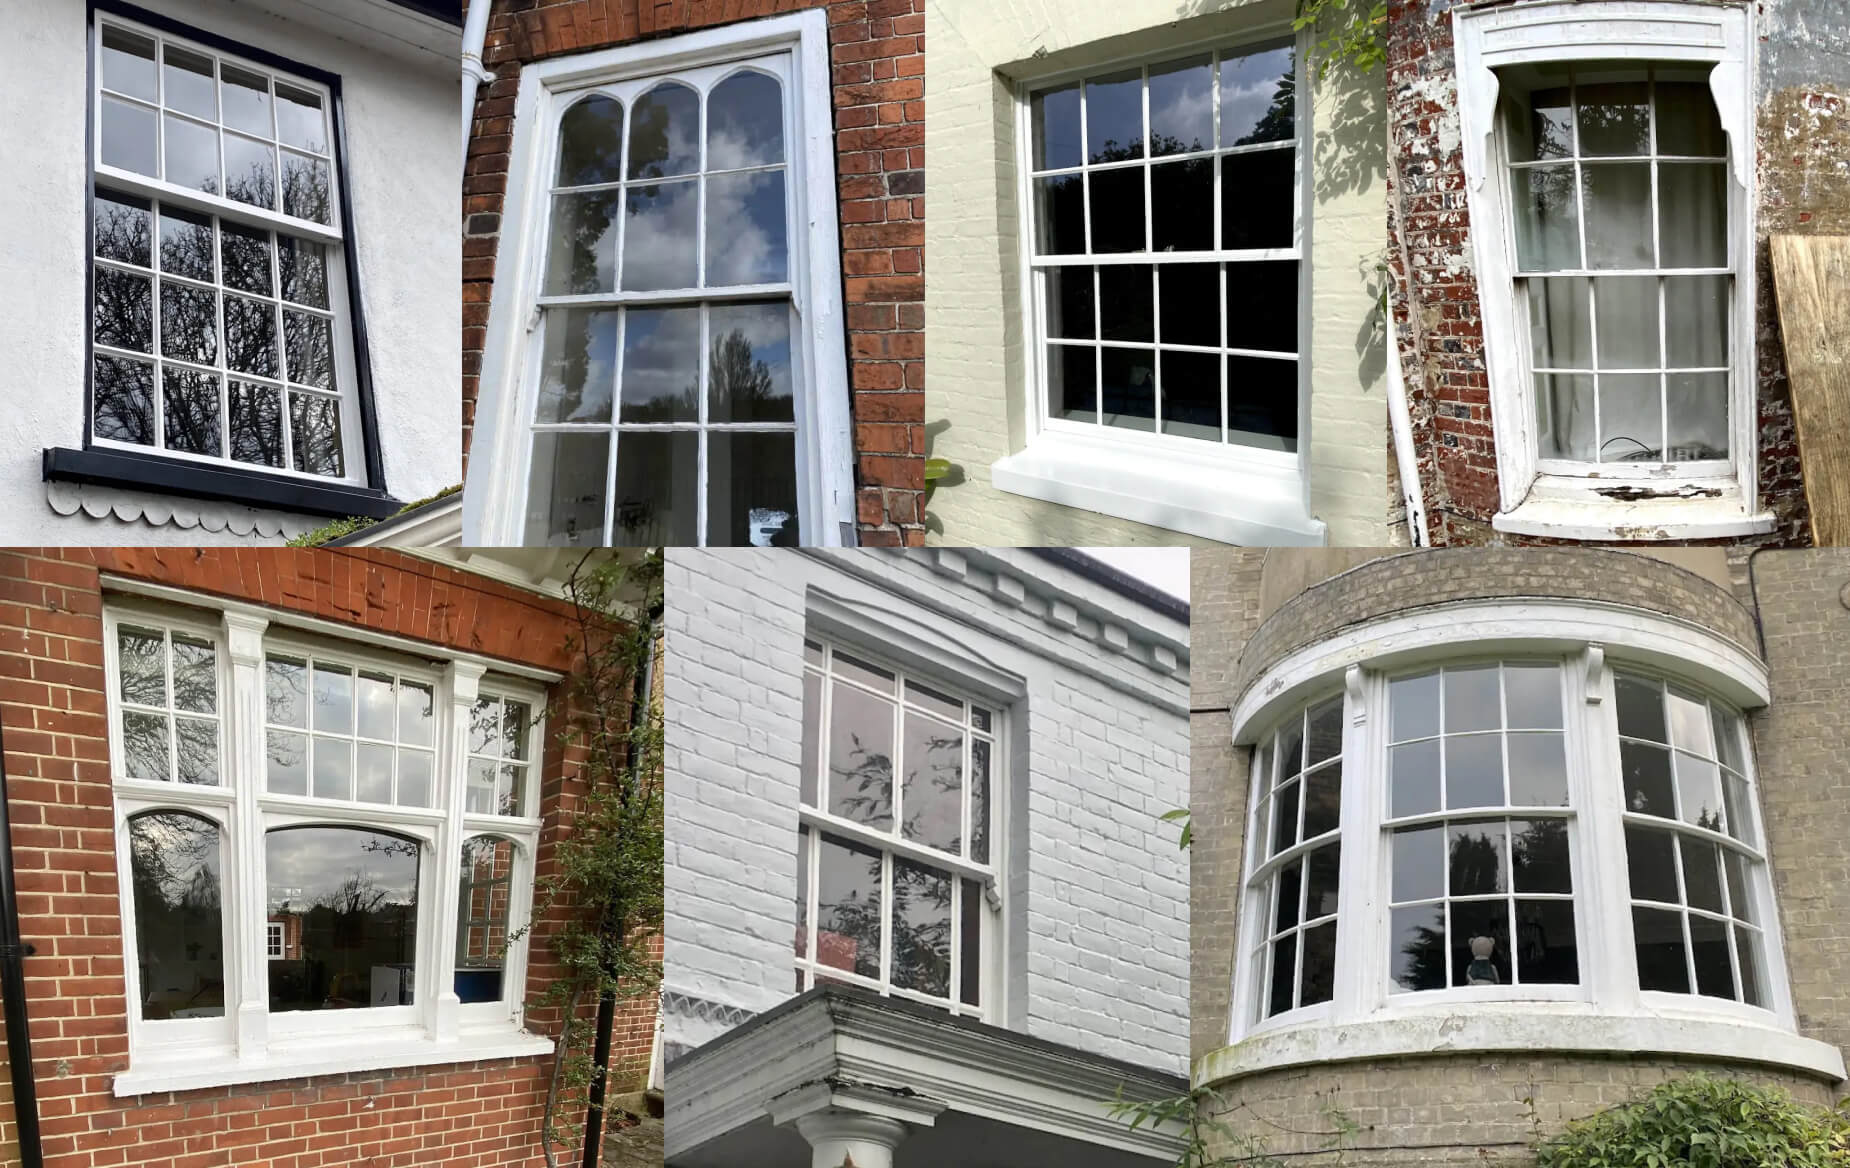 Different types of sash windows | Window styles from different architectural periods